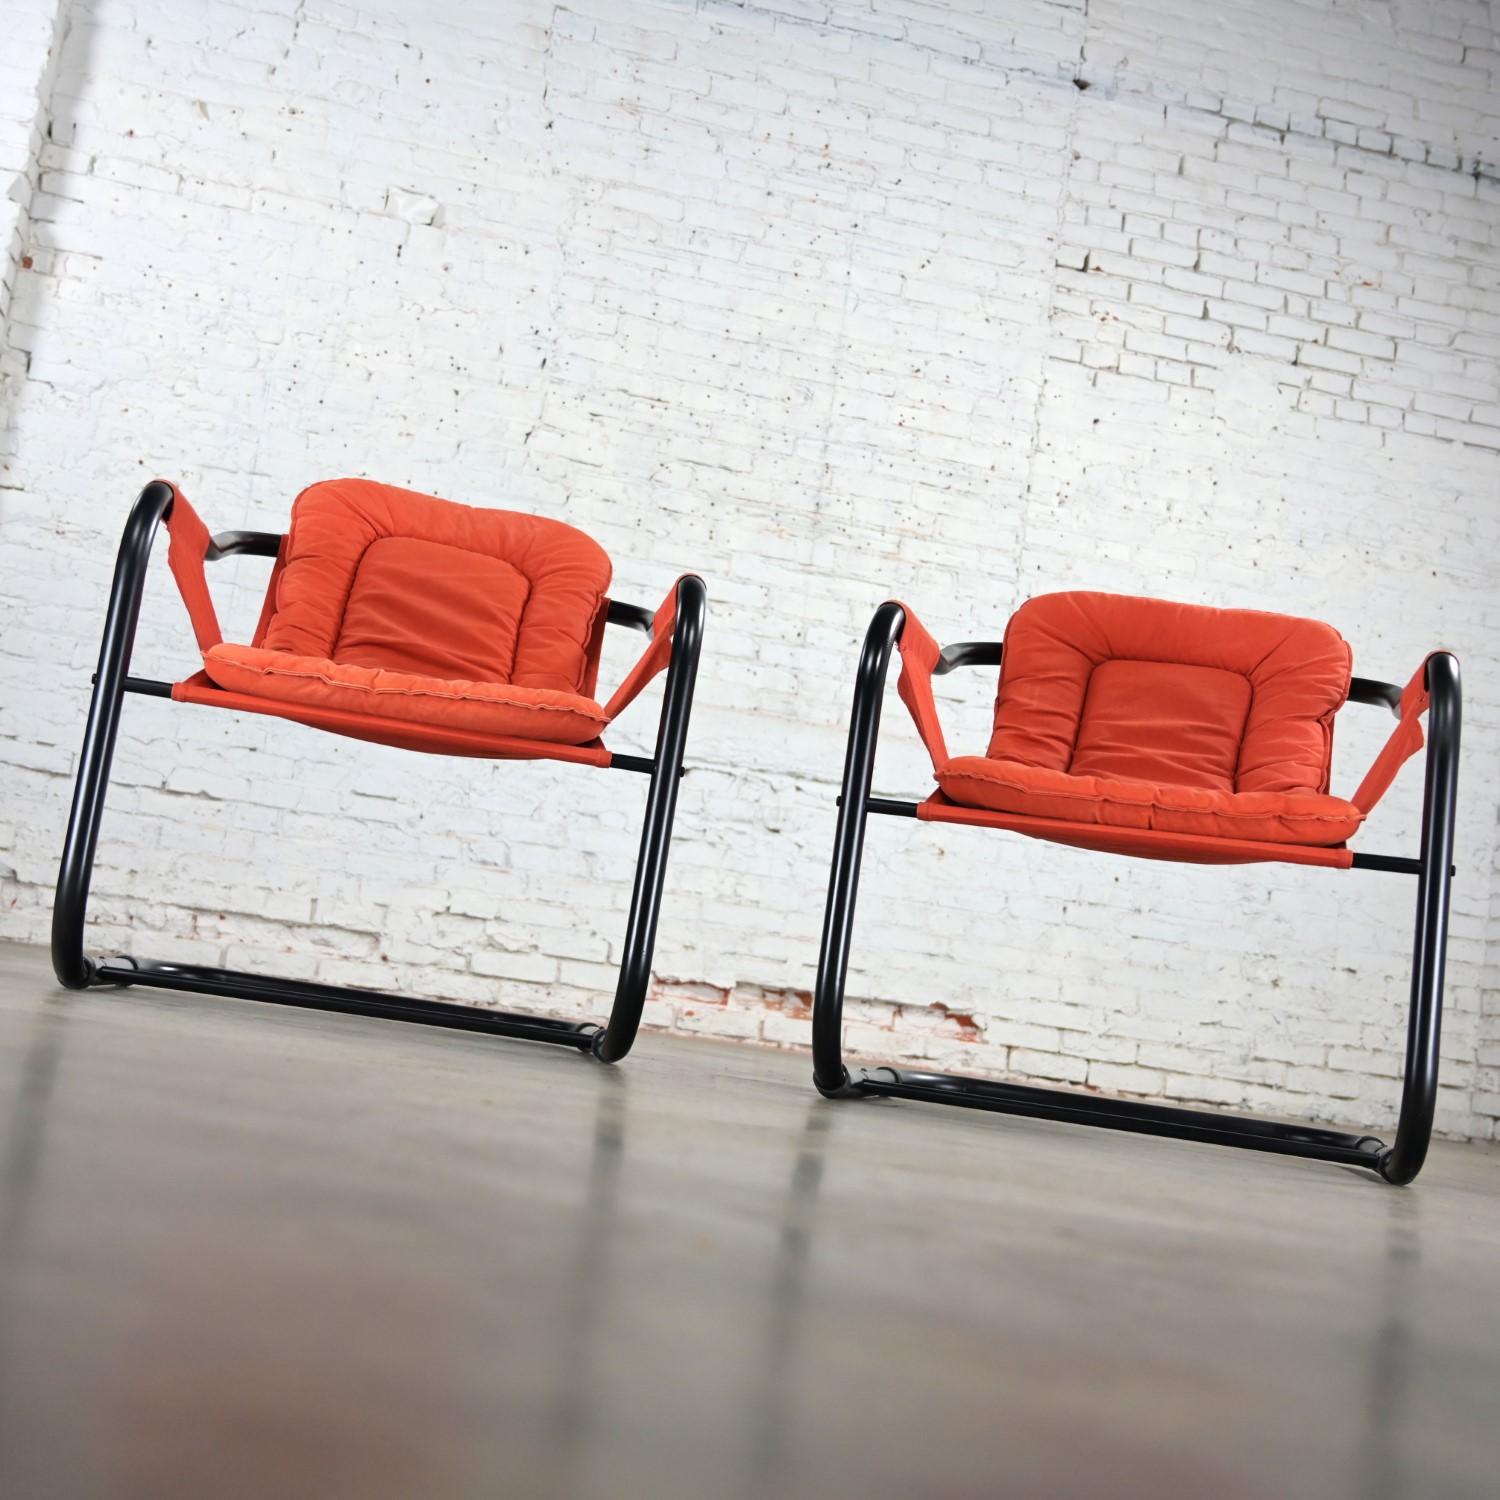 Late 20th Century 1970’s Modern Orange & Black Tube Cantilever Sling Lounge Chairs Jerry Johnson S For Sale